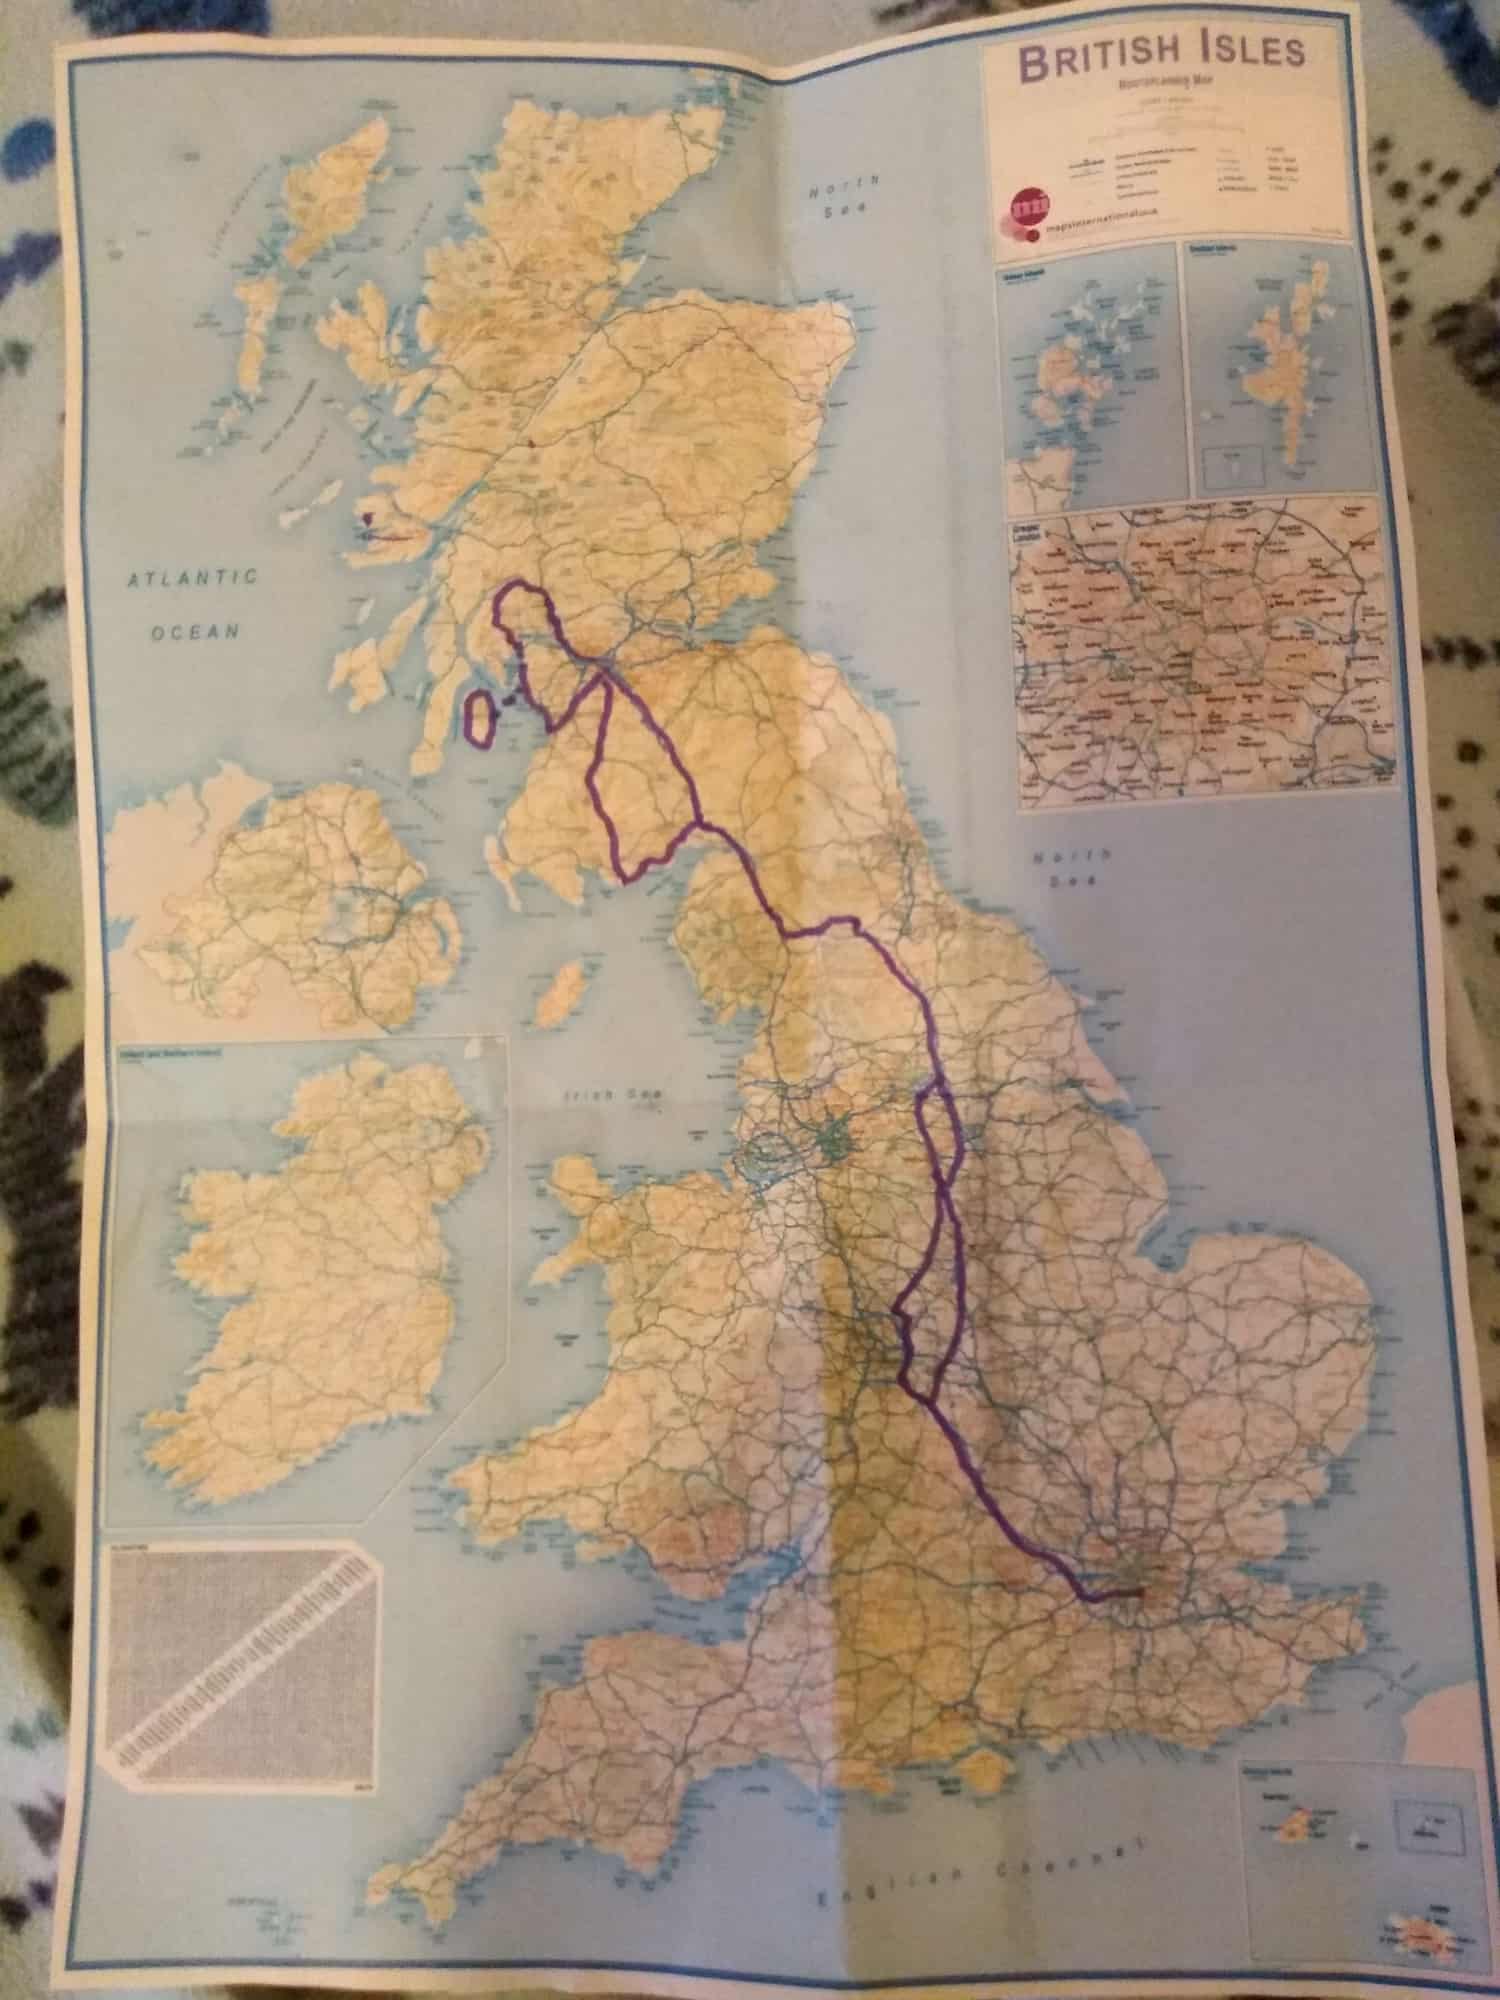 Very rough sketch of route I took across motorways and overall route up to Loch Lomond and back